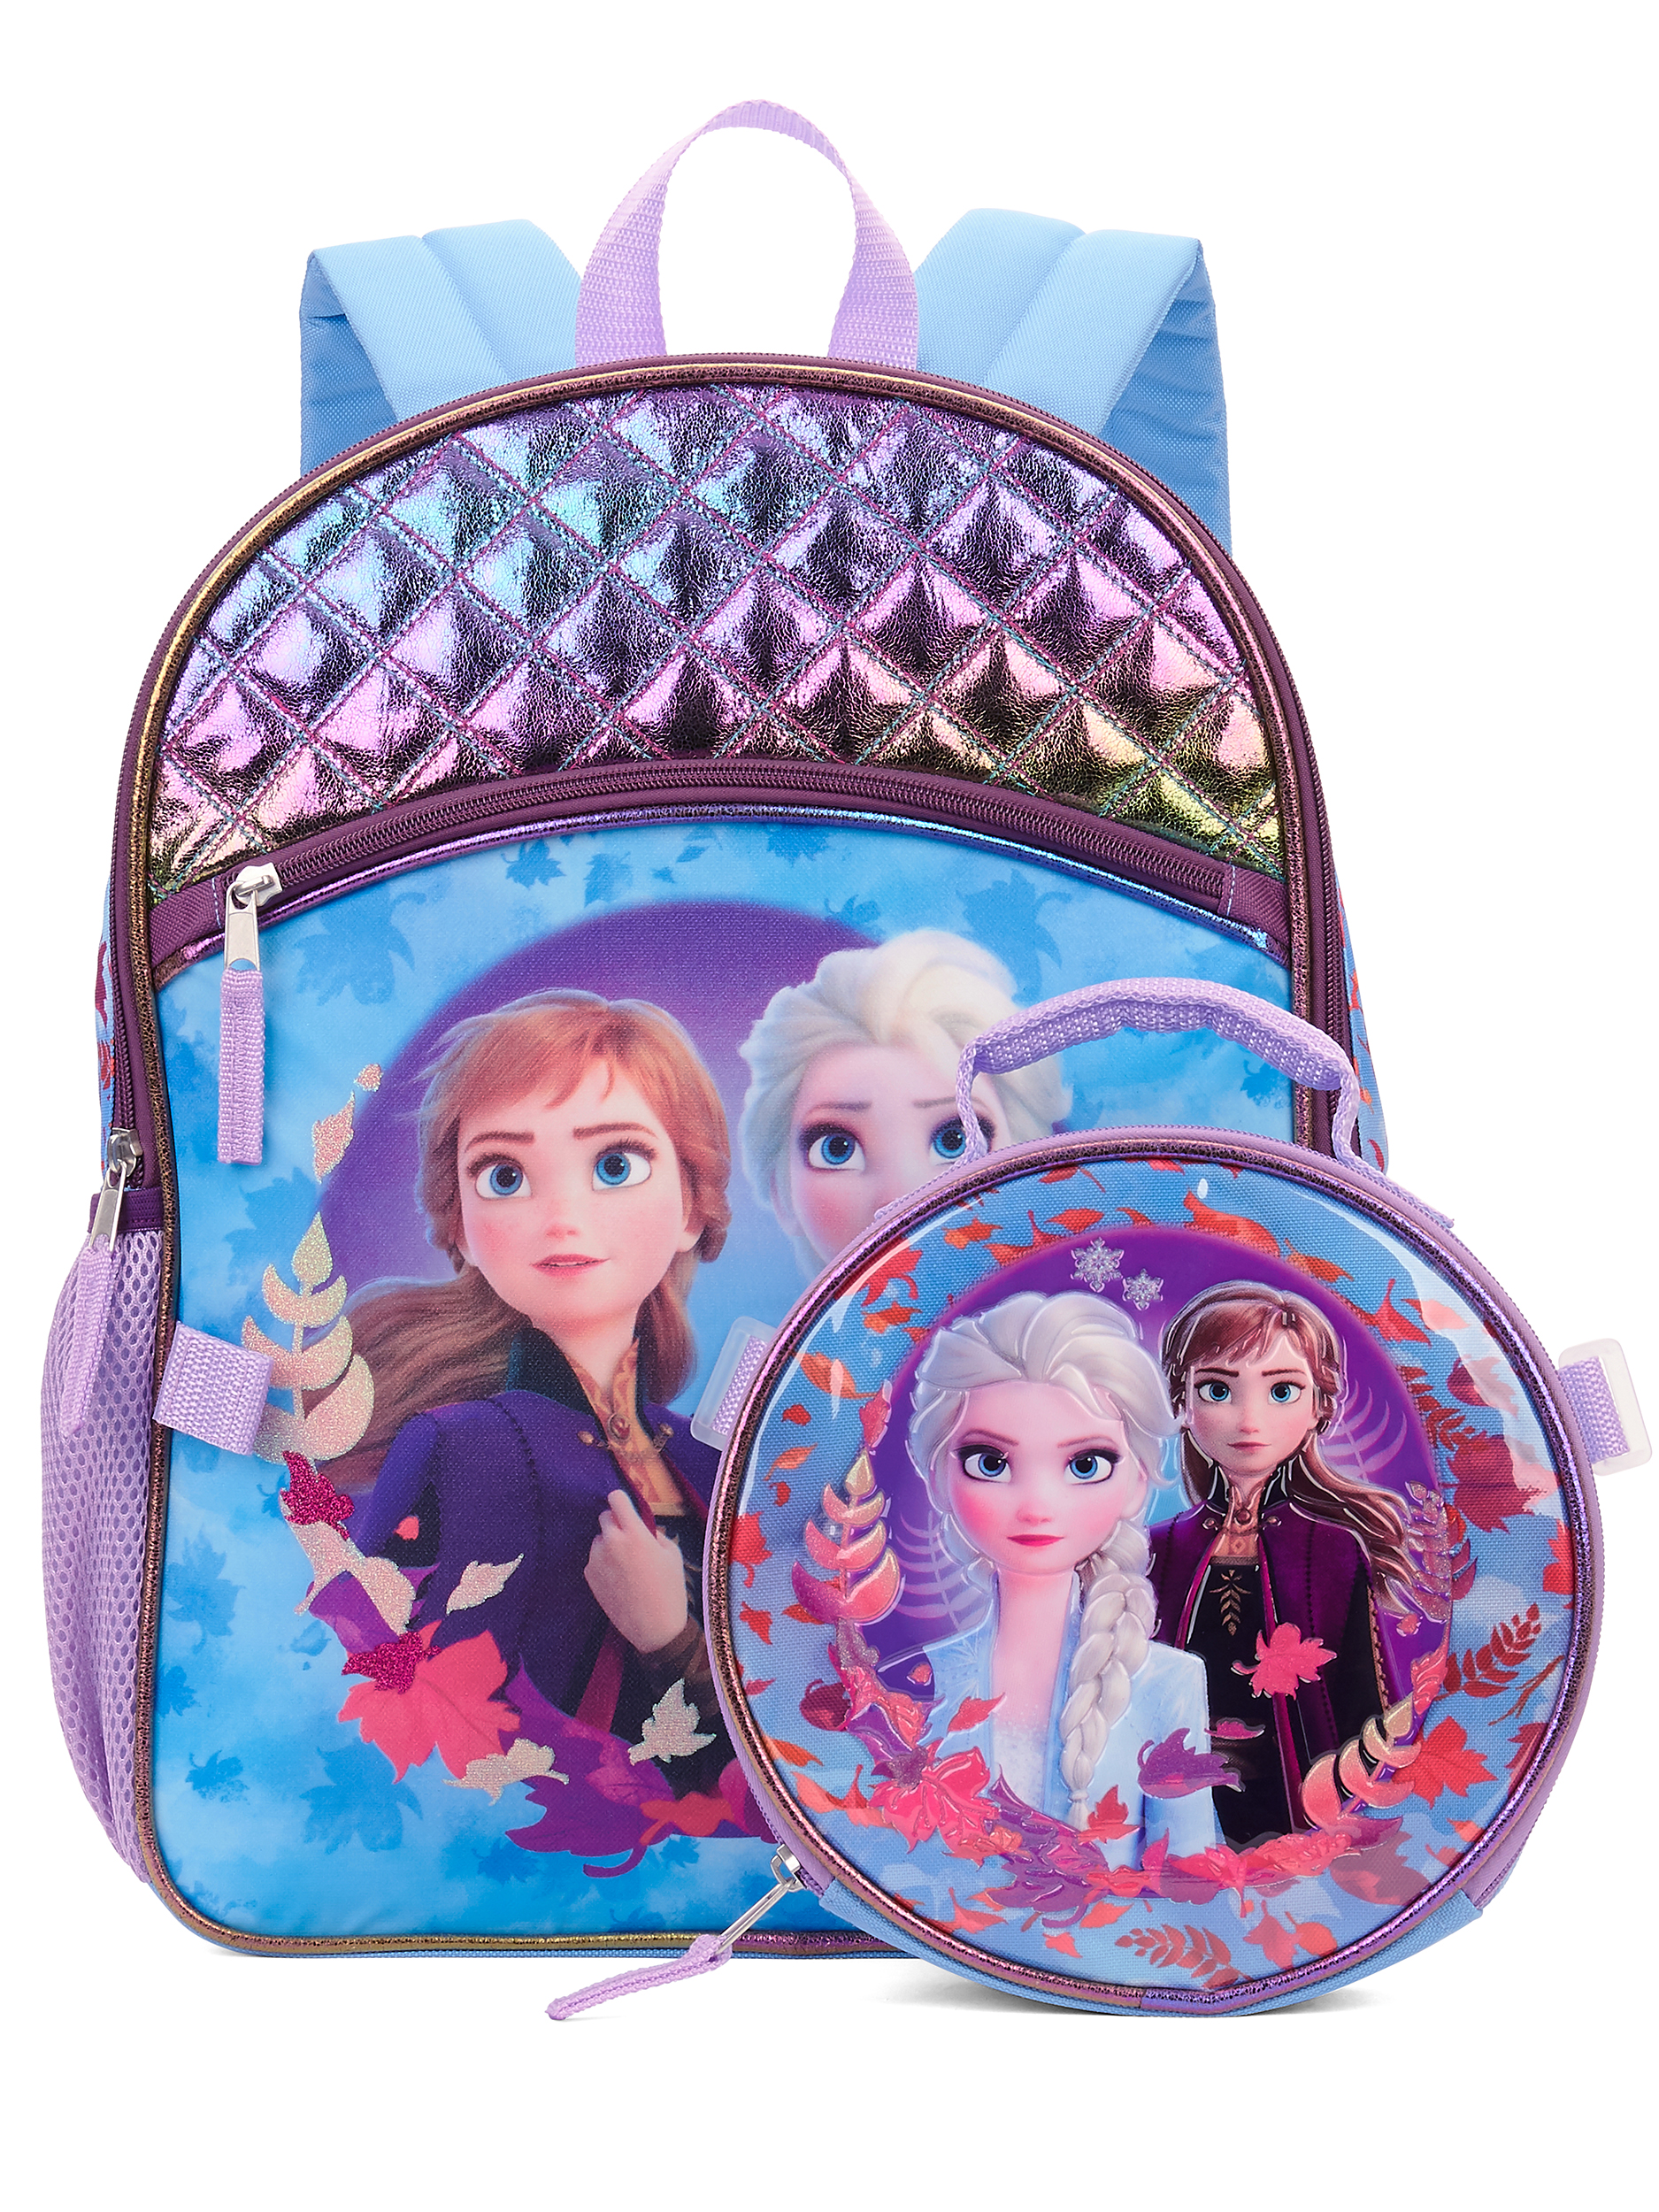 Disney Frozen 2 Elsa And Anna Girls' Purple Blue Backpack with Lunch Bag - image 1 of 3